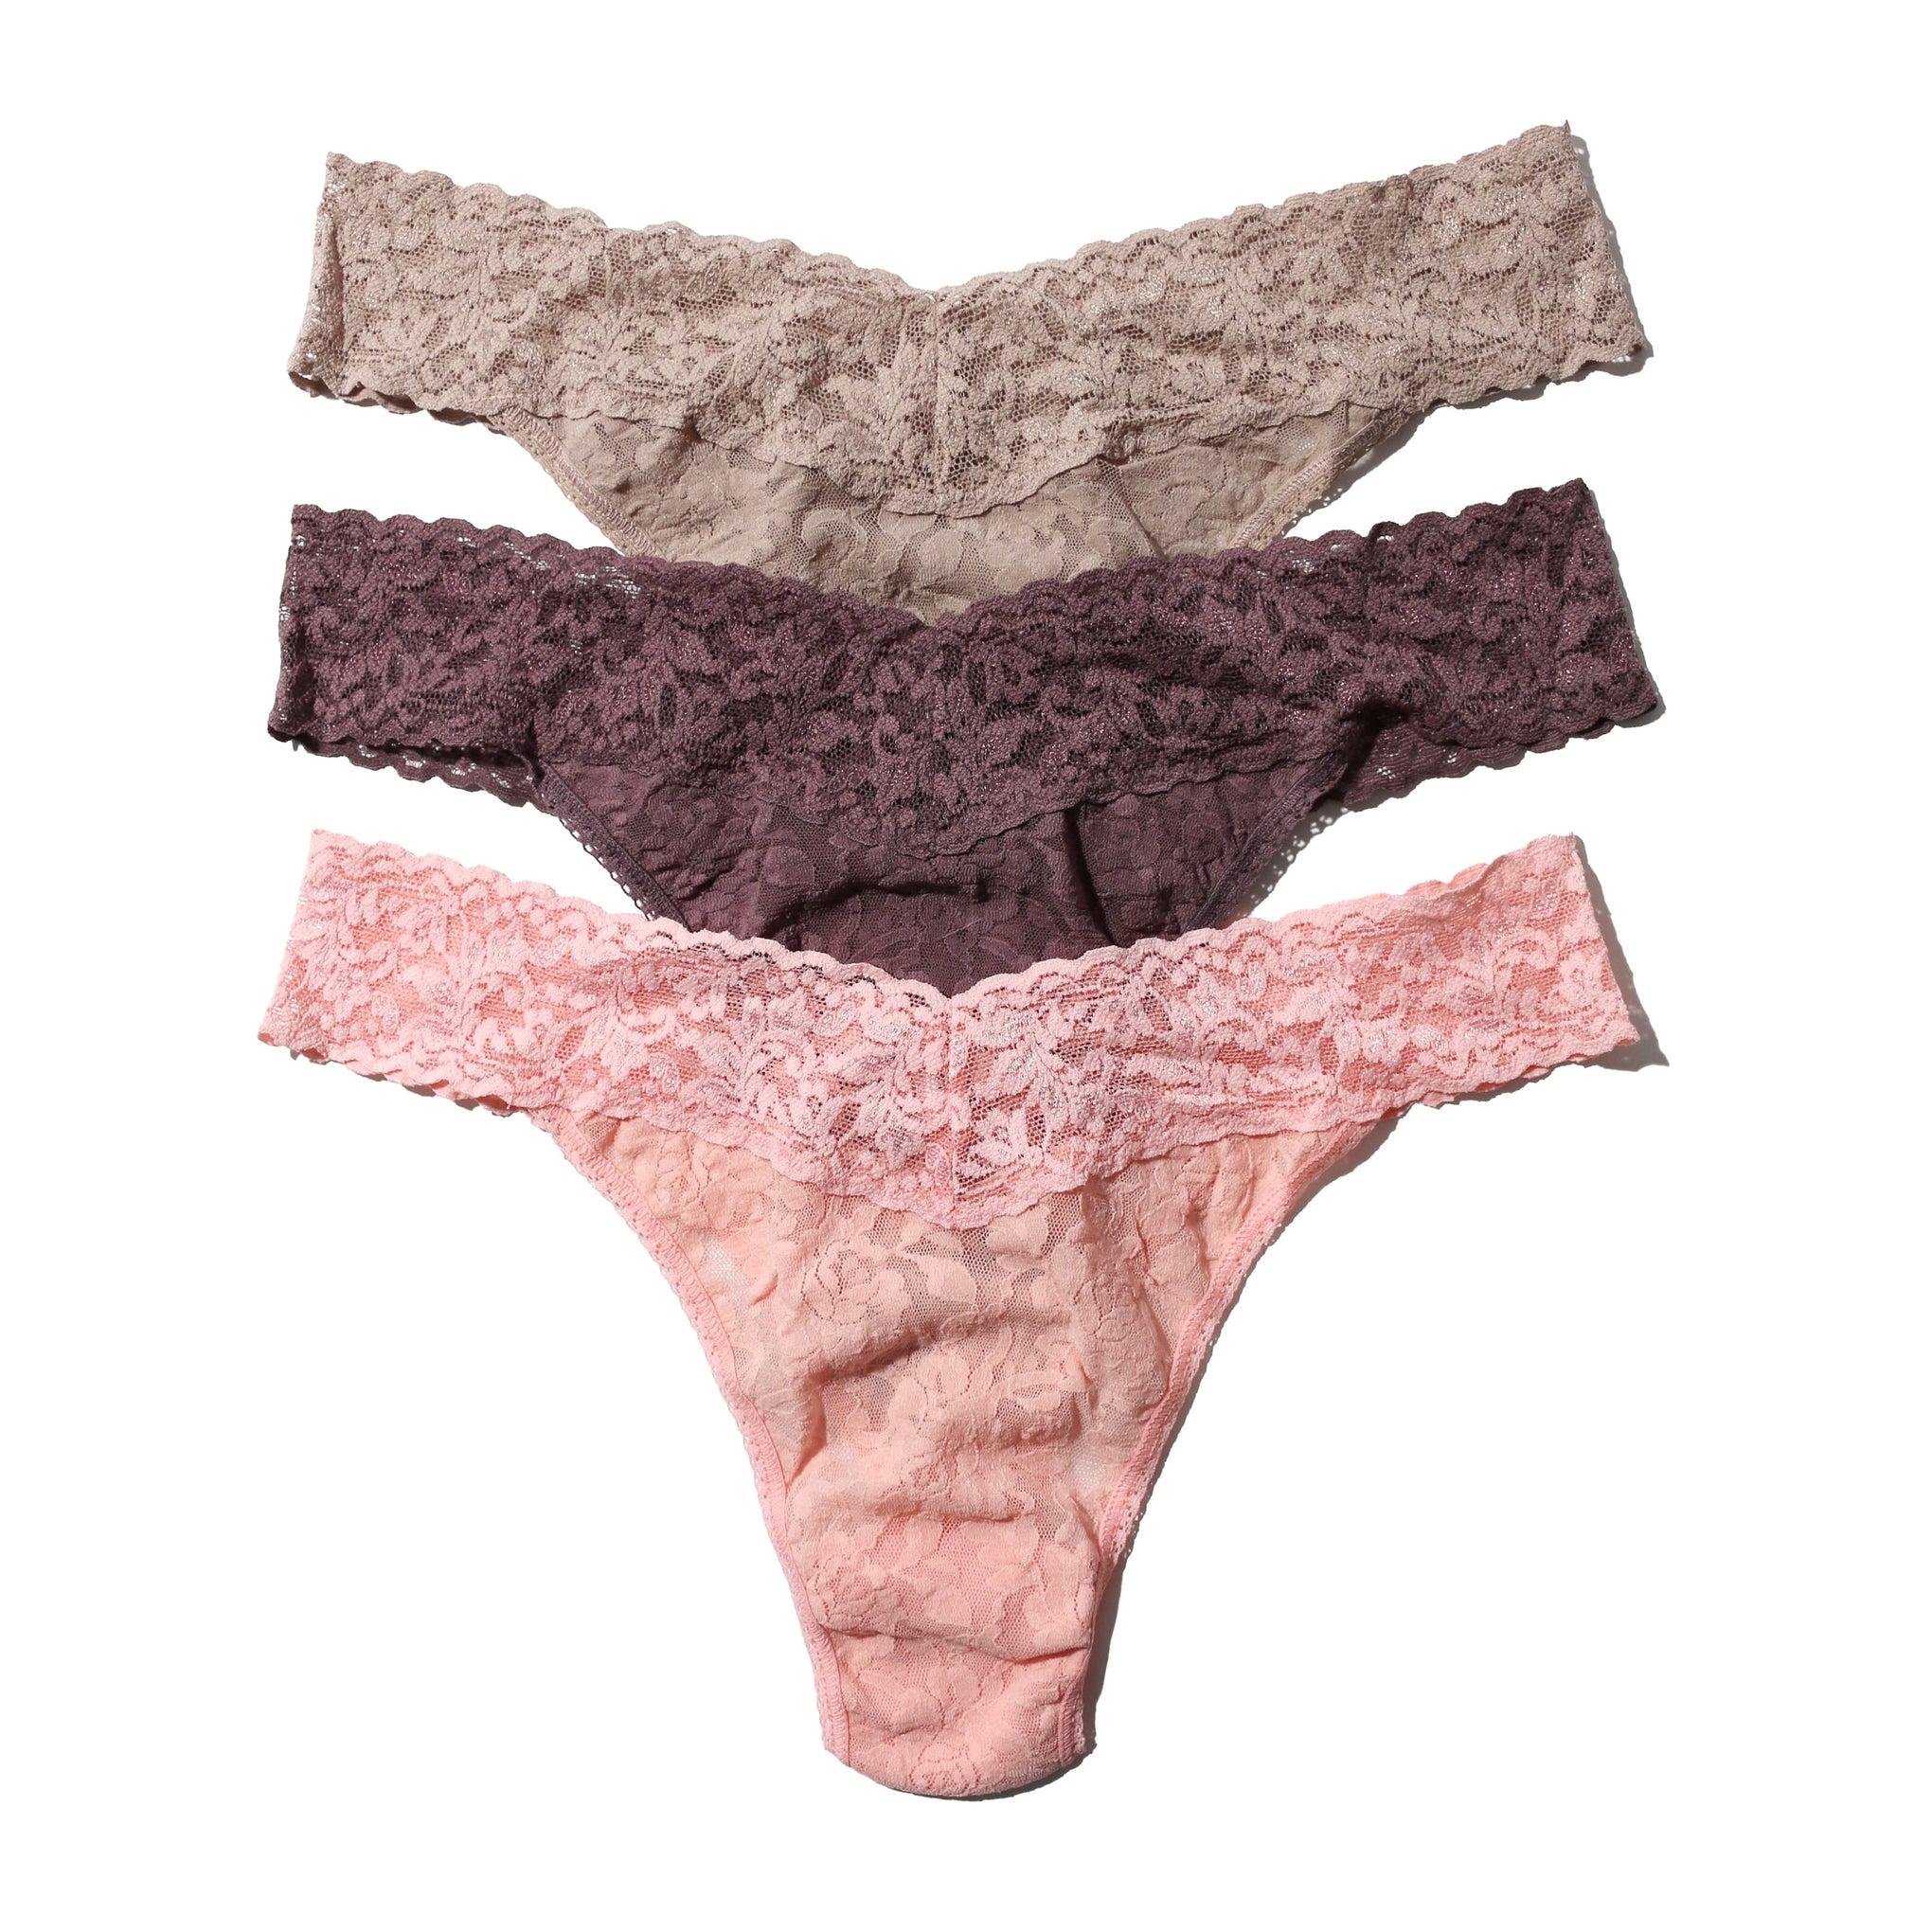 Pack of 3 Flourish Lovely Lace Panty buy at